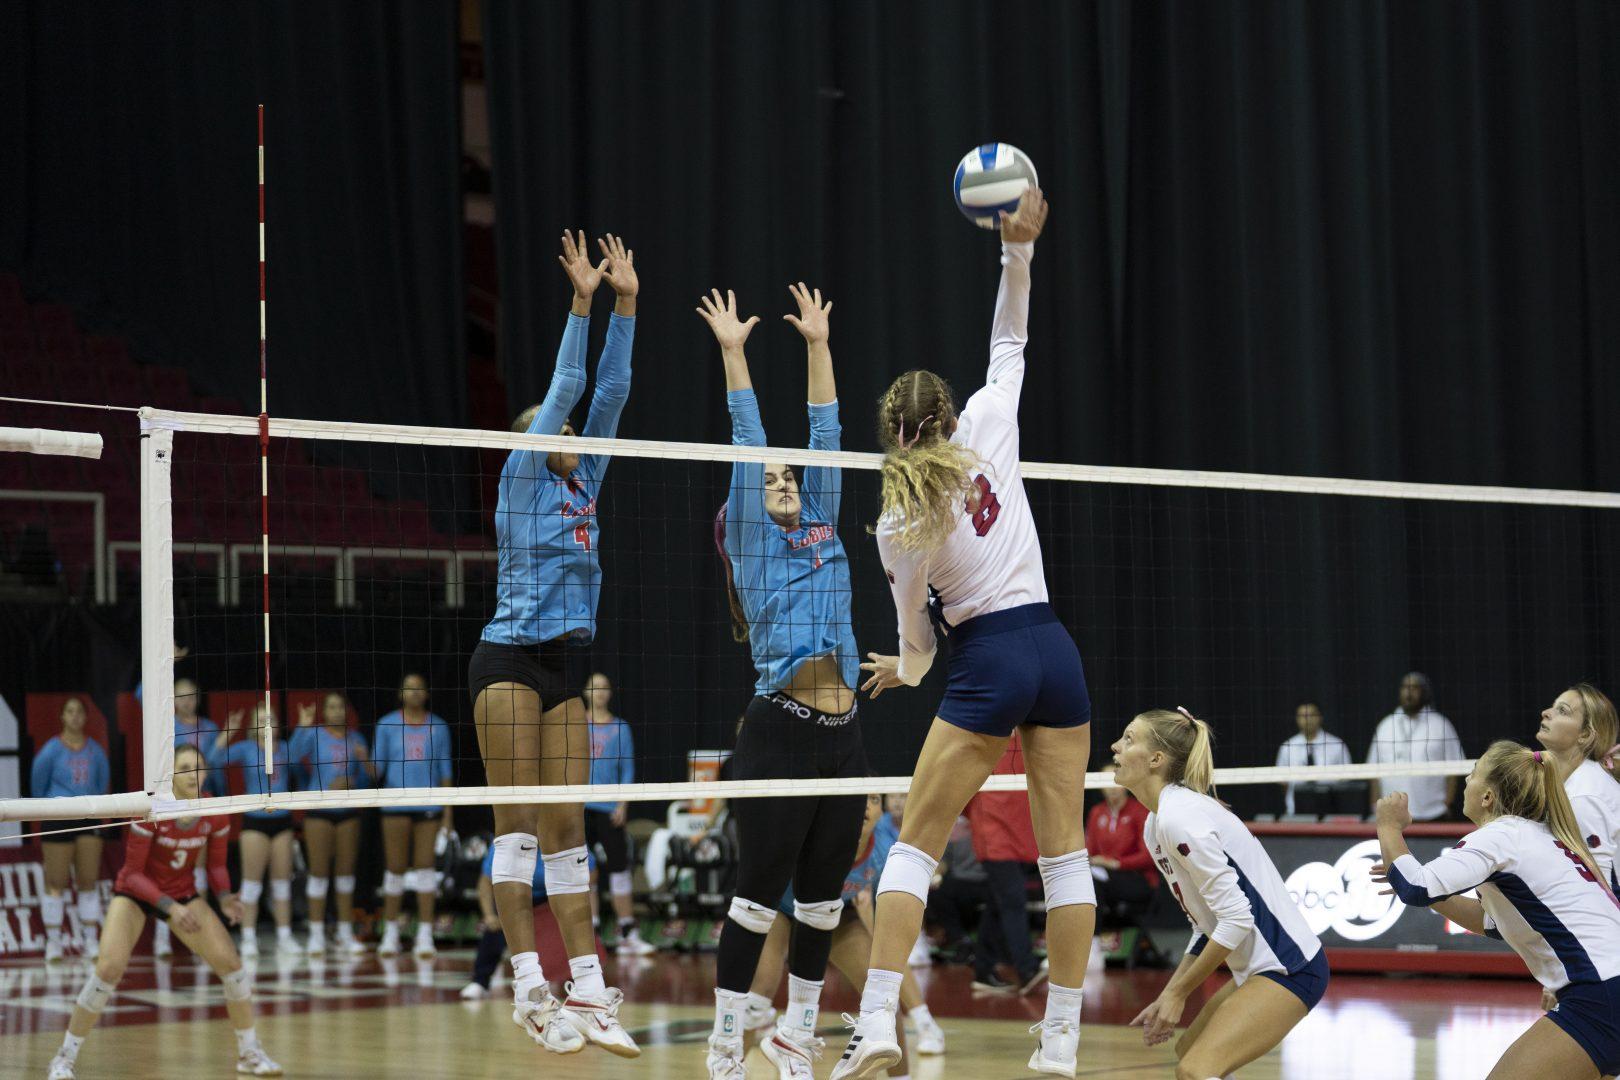 Ella Run (8) spikes the ball in the game against New Mexico on Oct. 22, 2022. (Blake Wolf/ The Collegian) 